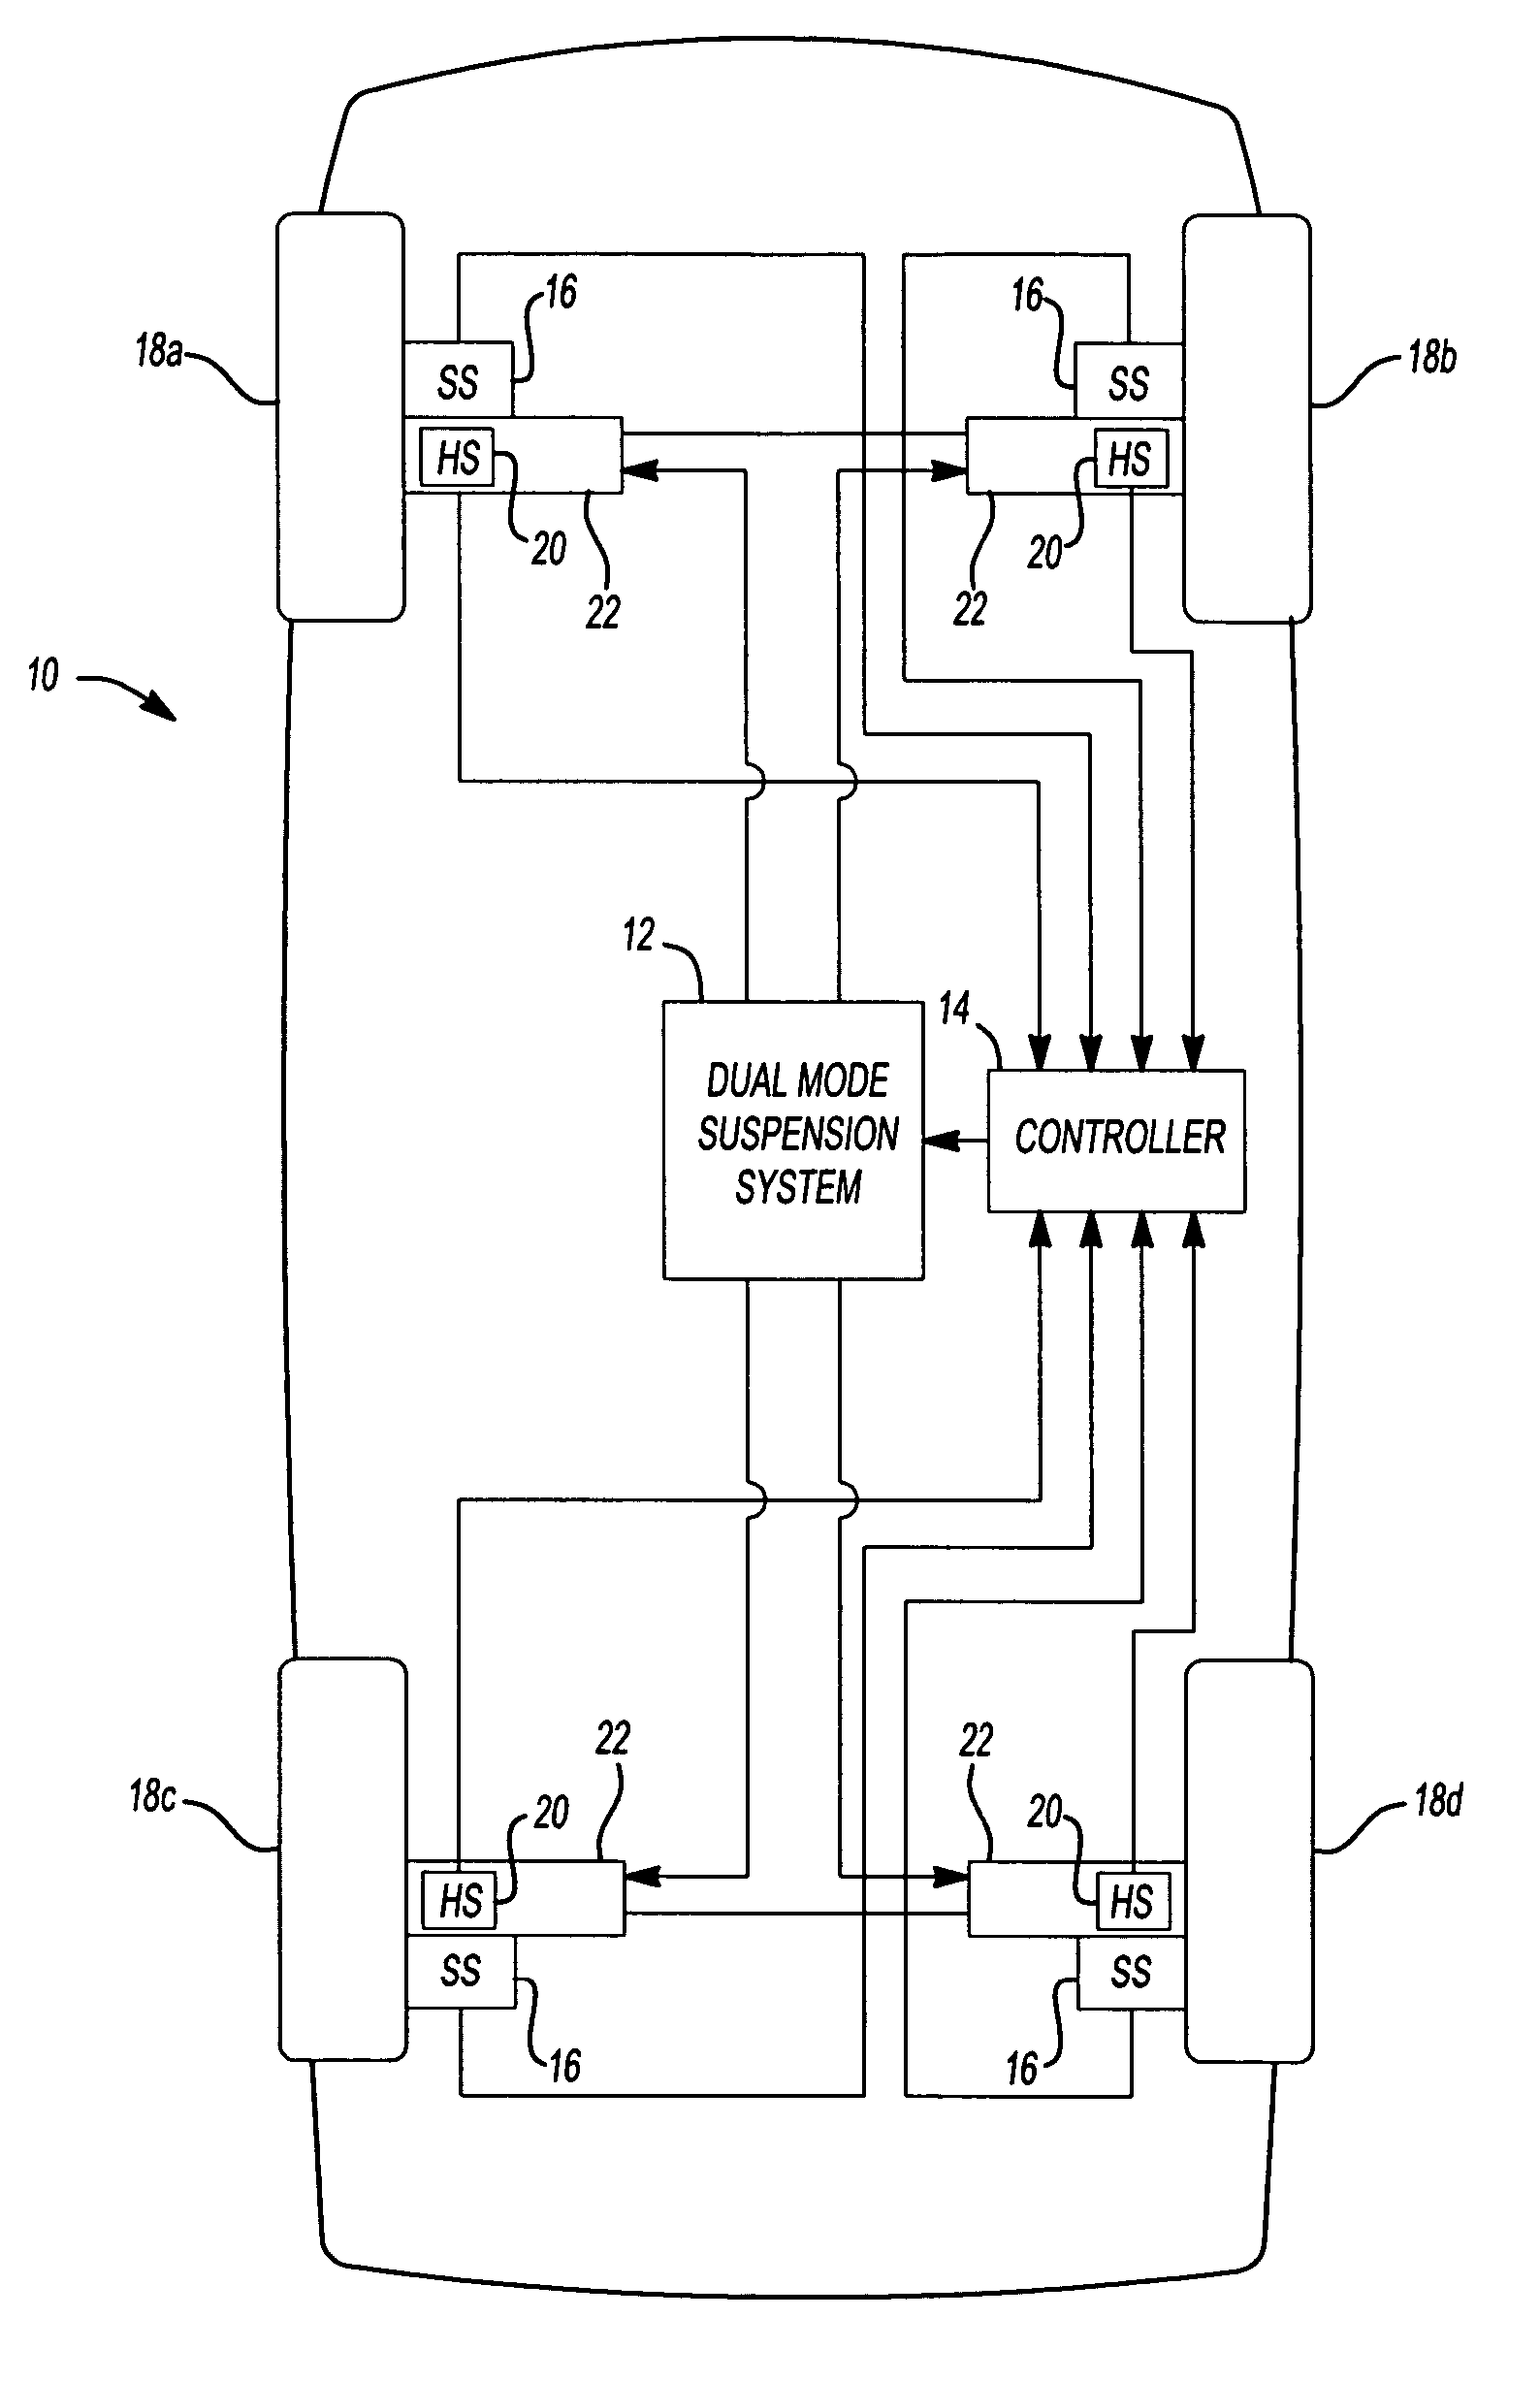 Method and system for controlling a dual mode vehicle suspension system